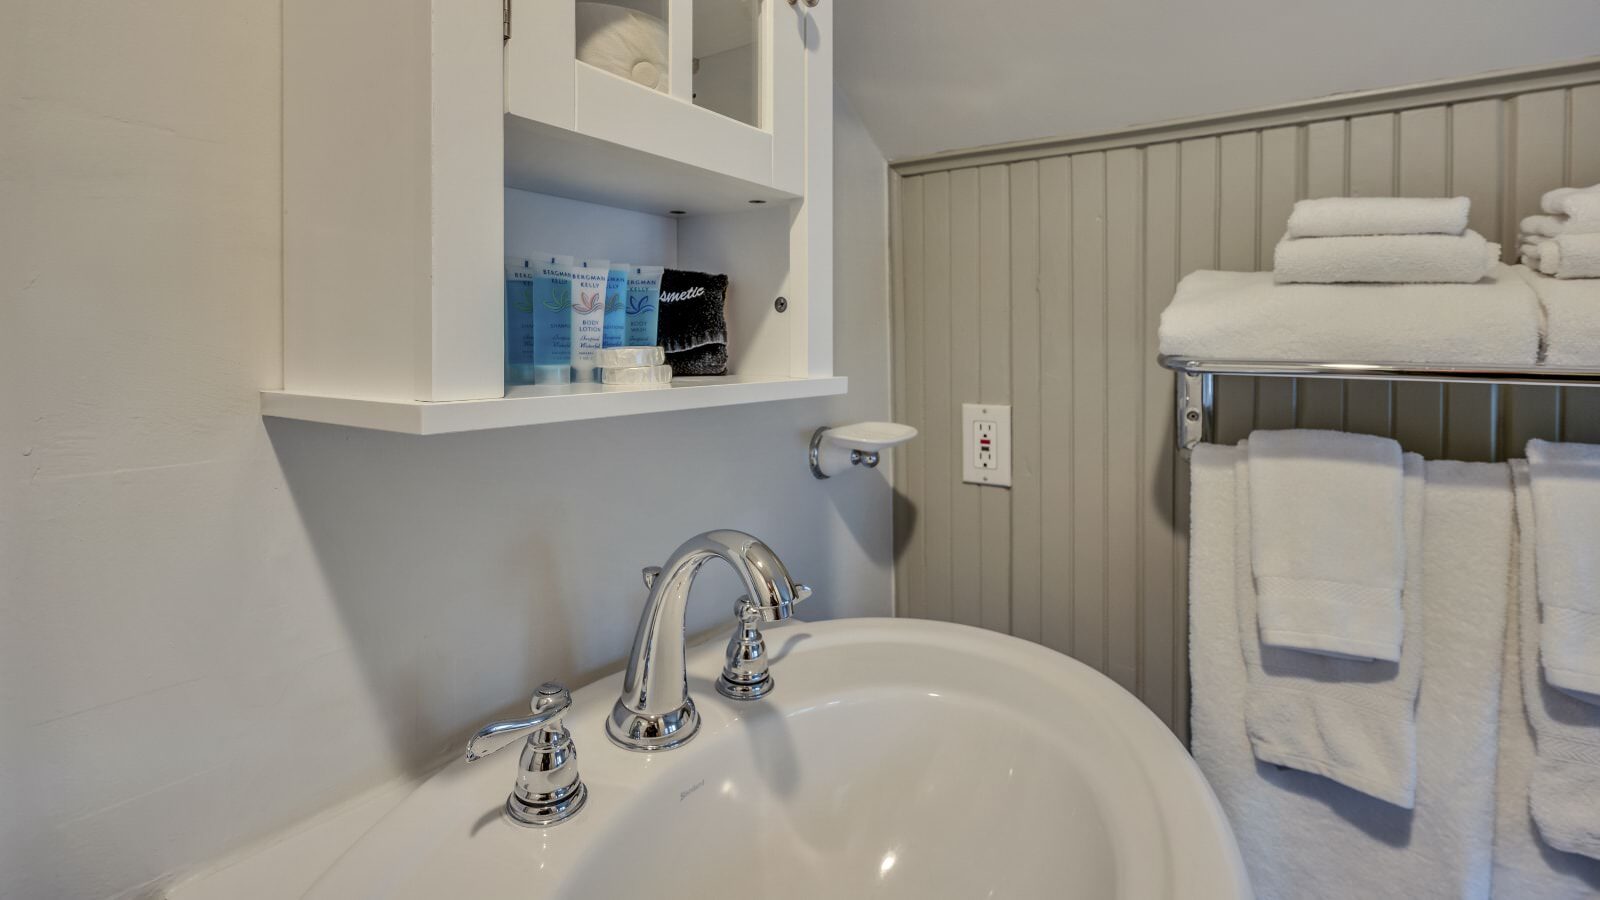 Close up view of white sink, white medicine cabinet, and towel bar with white towels